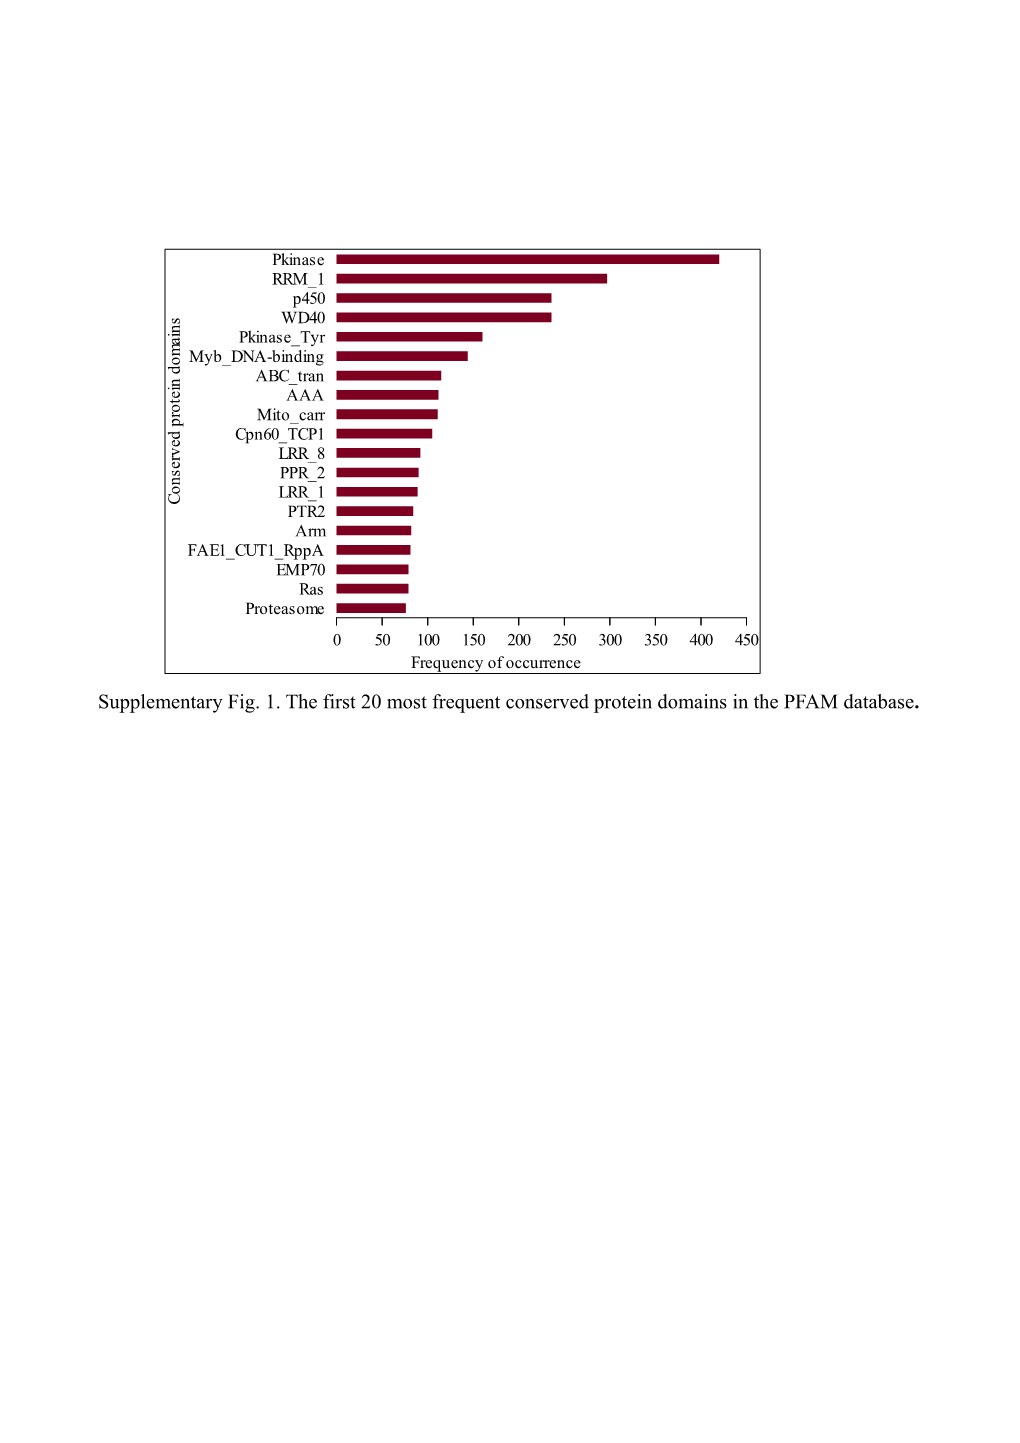 Supplementary Fig. 1. the First 20 Most Frequent Conserved Protein Domains in the PFAM